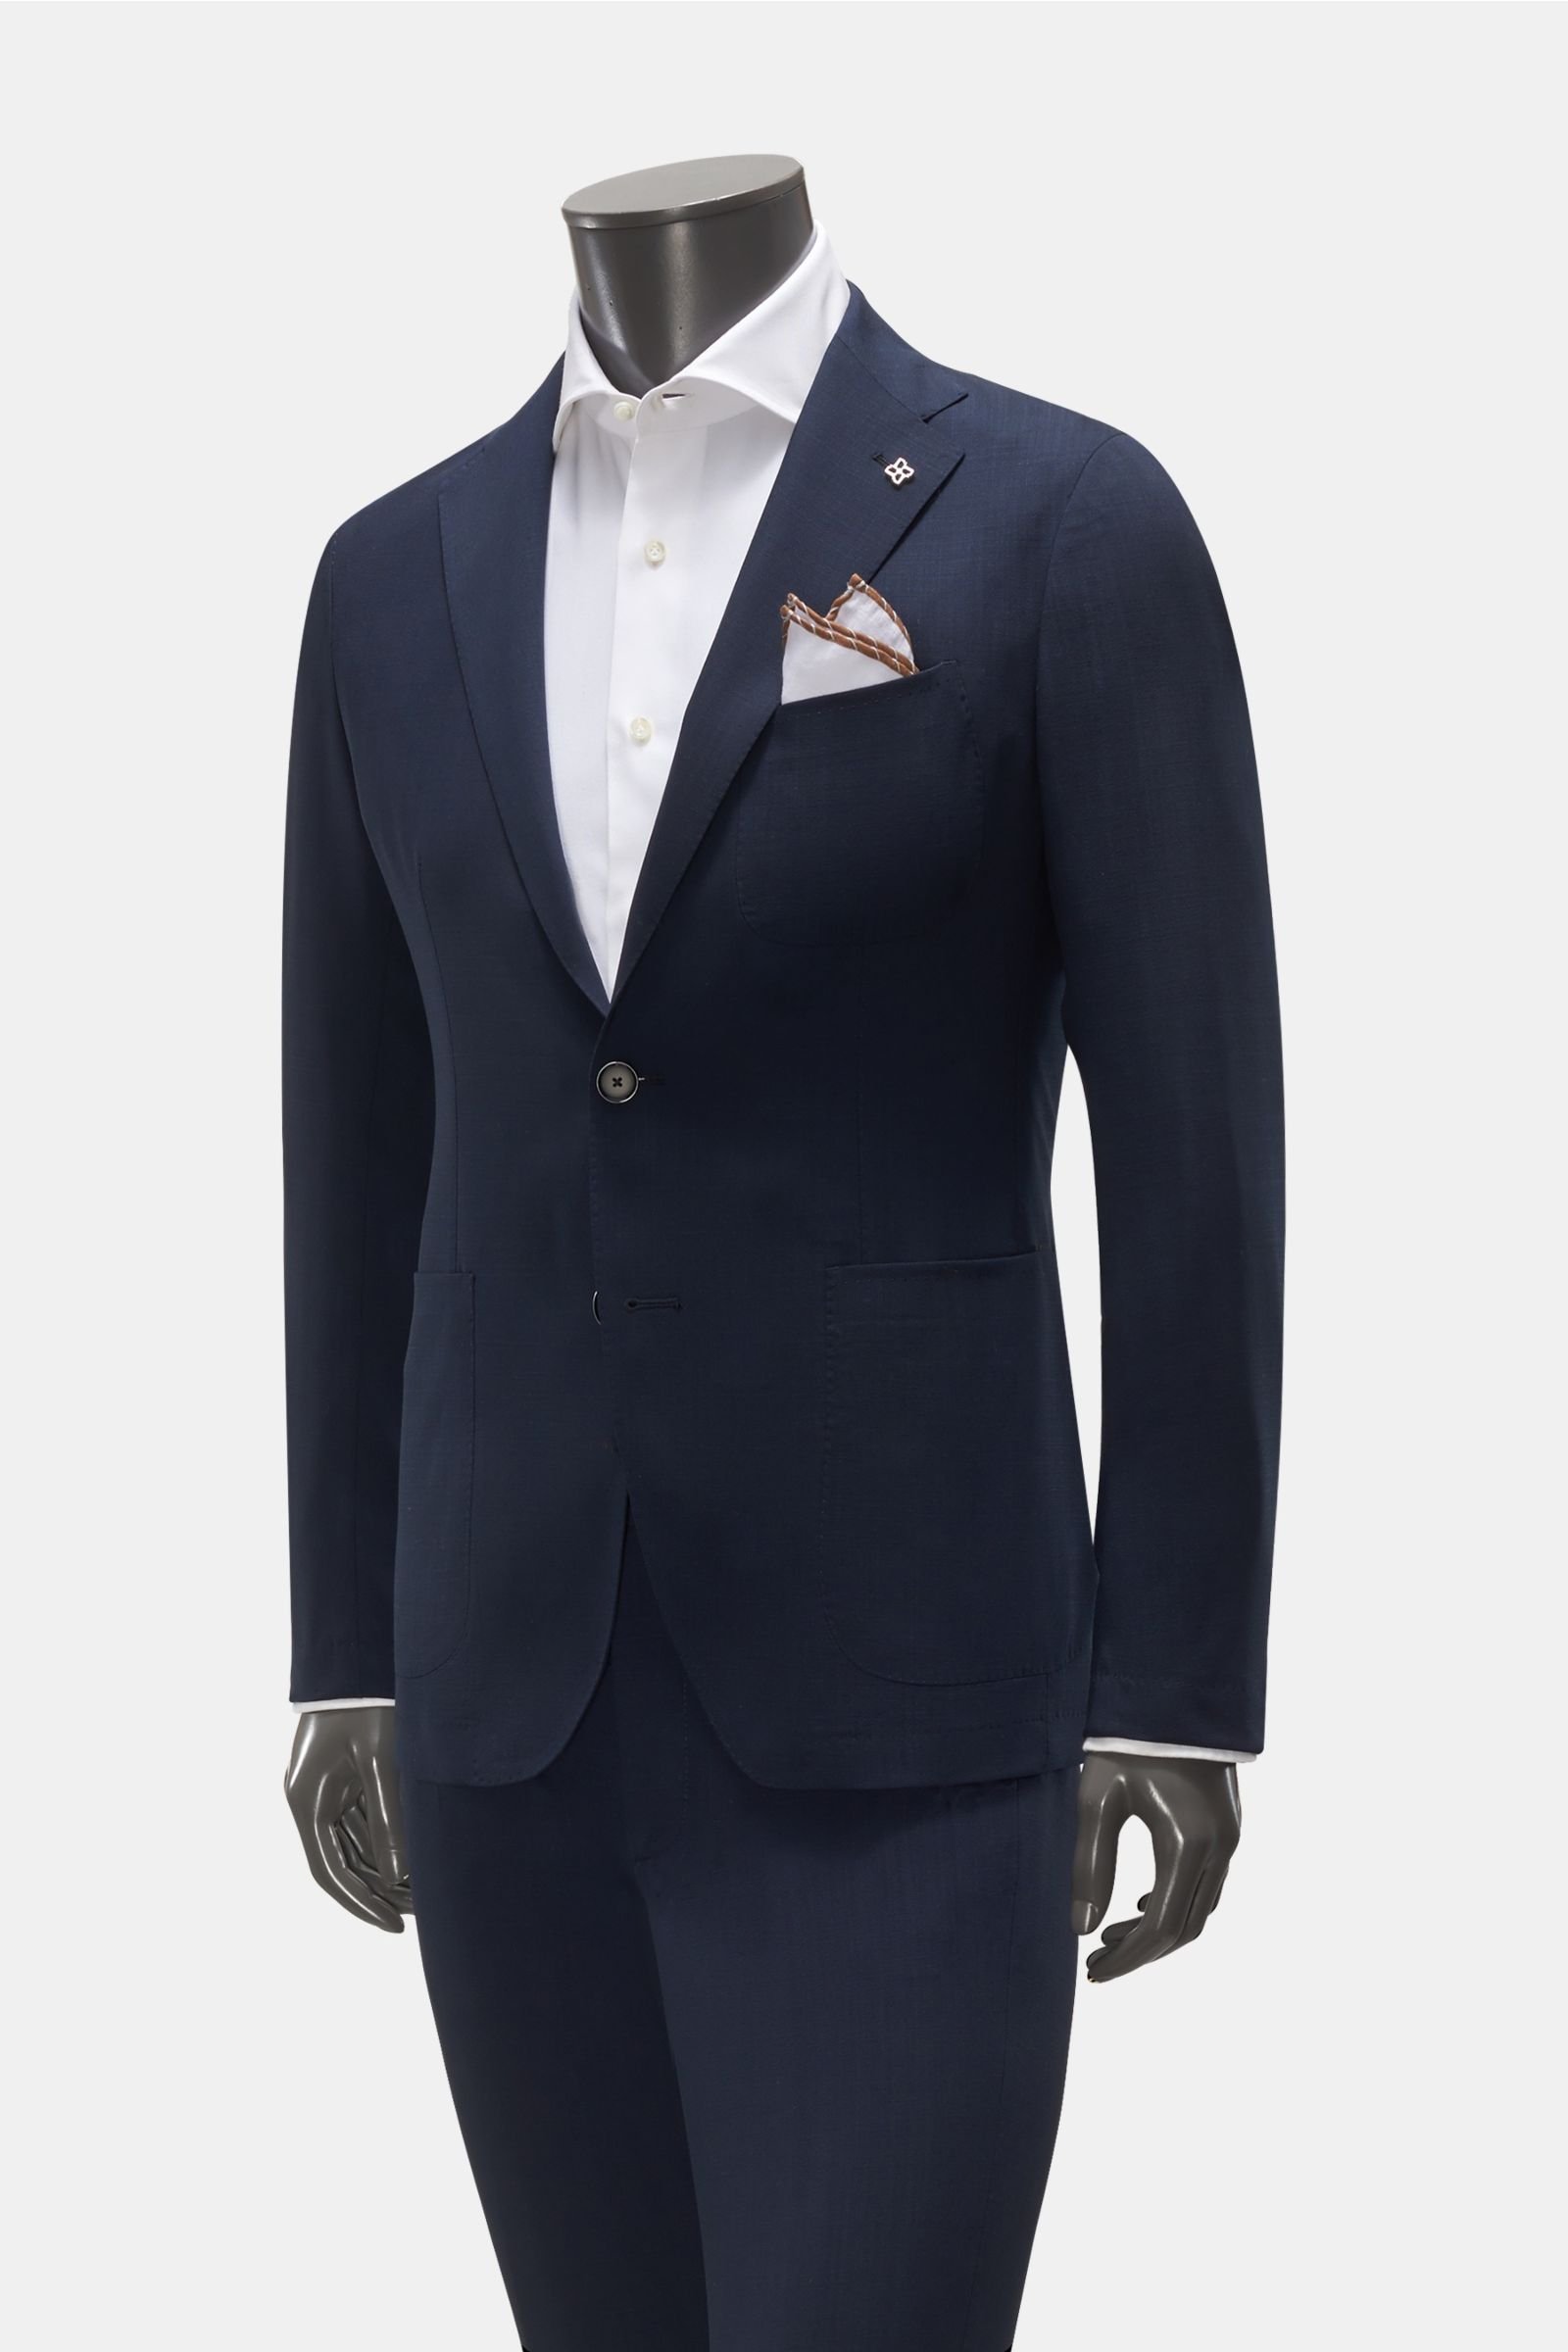 Suit 'A-Travel' navy